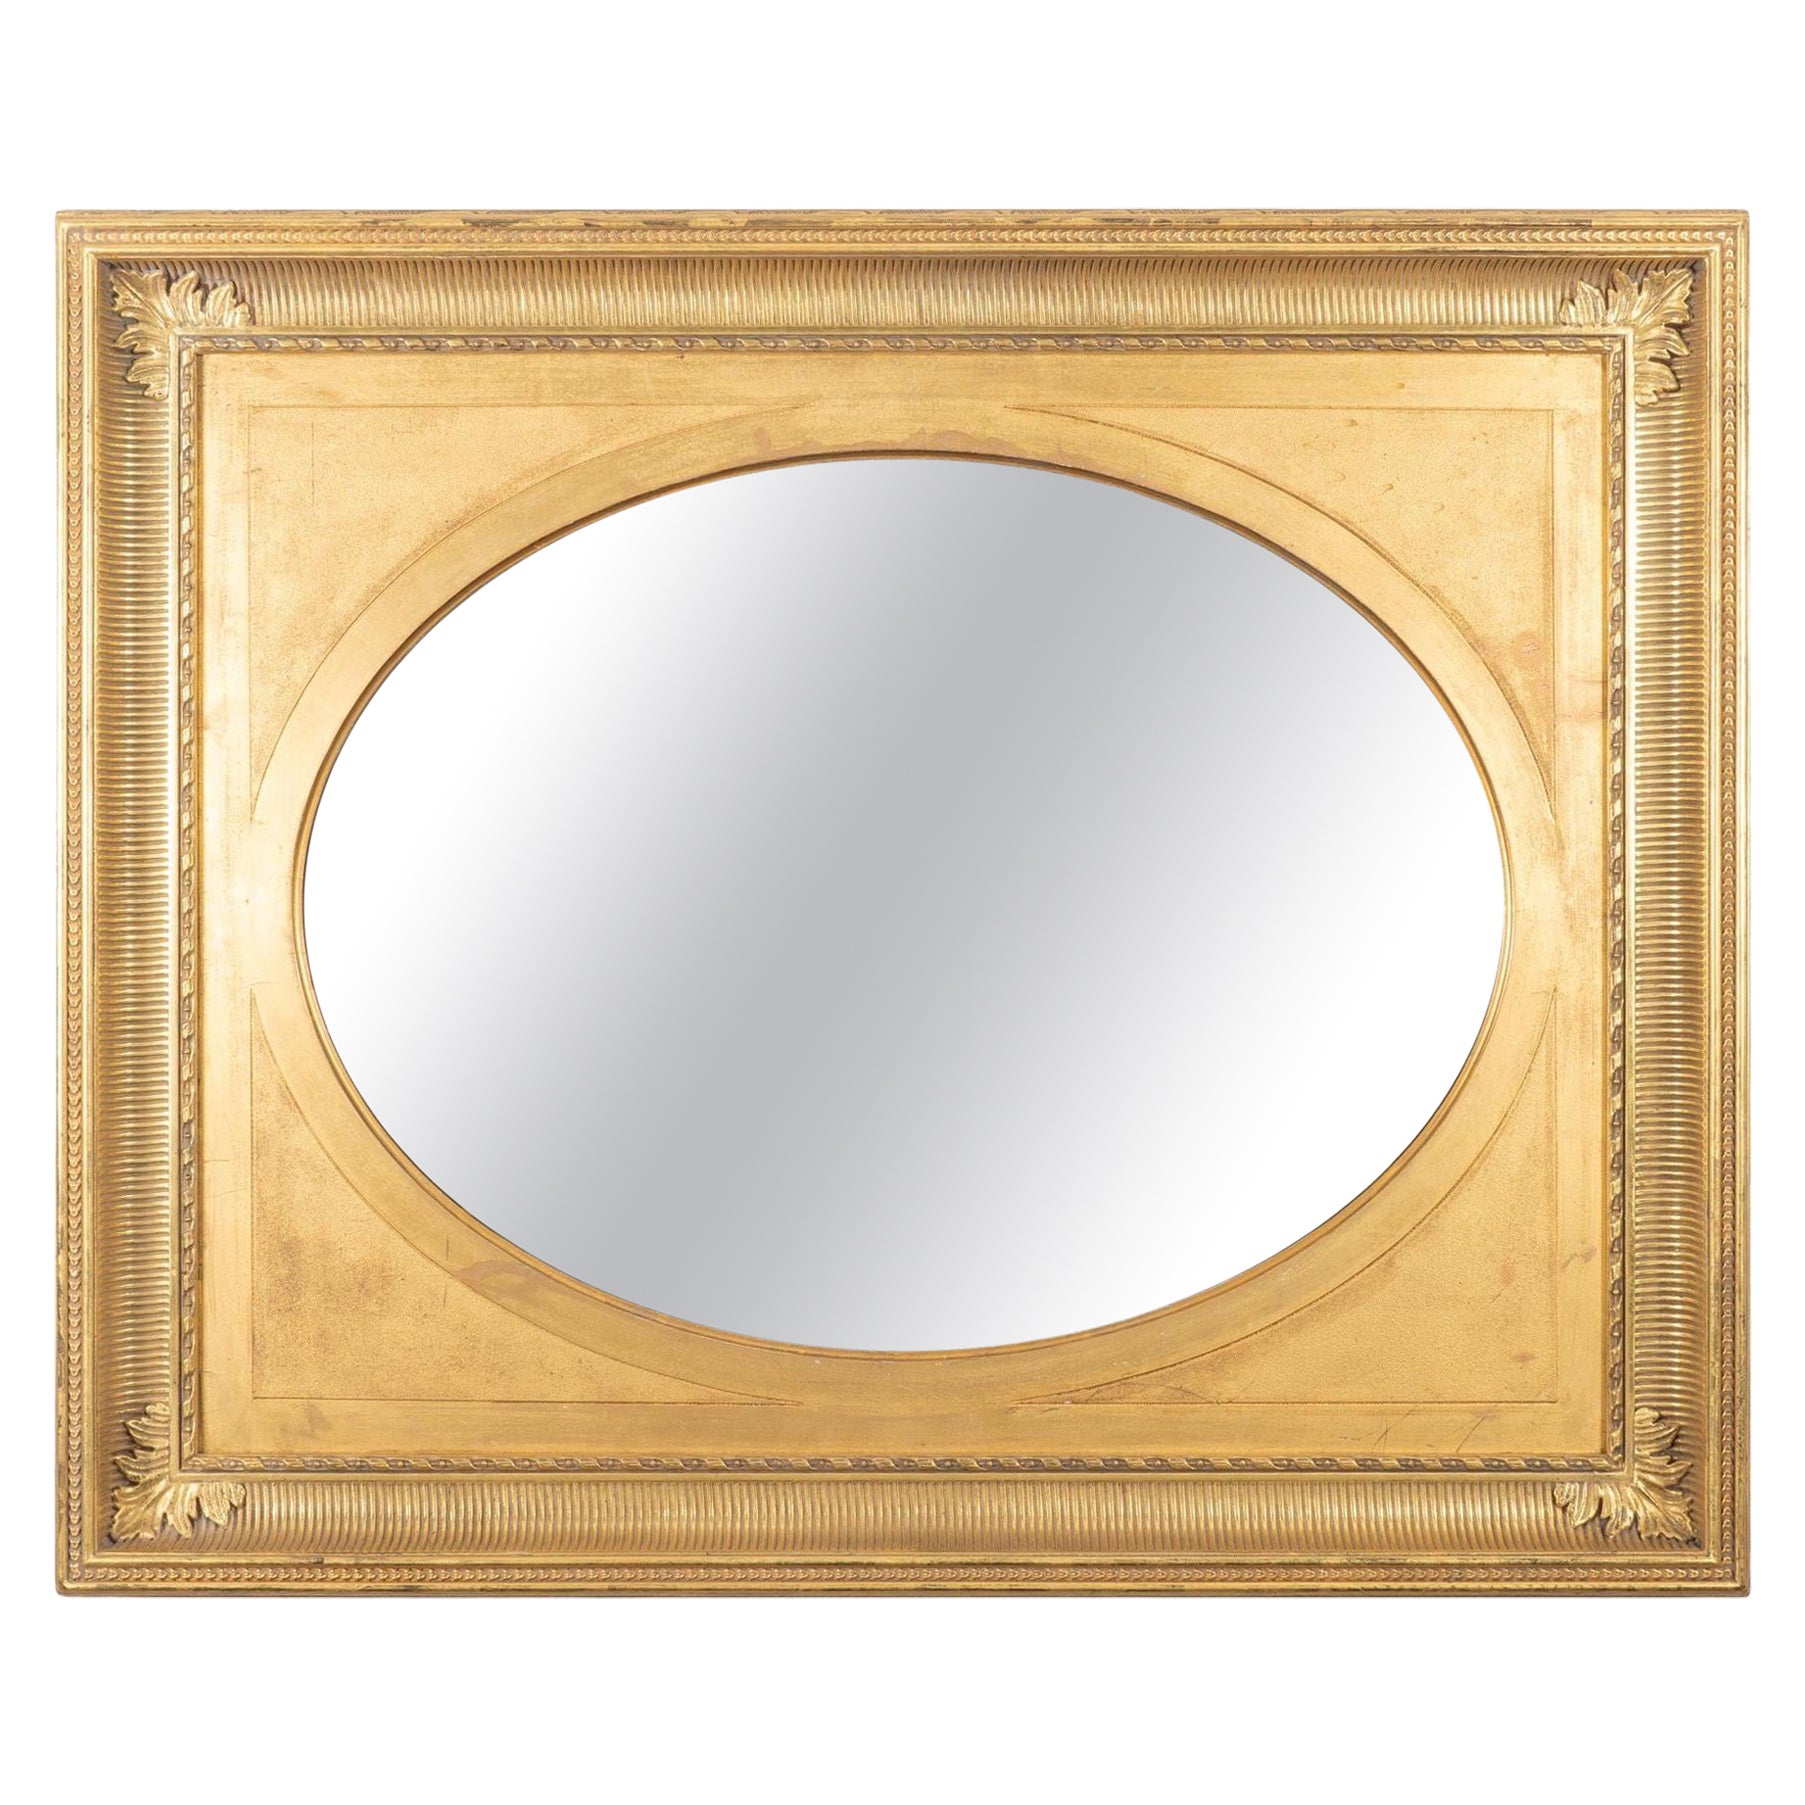 American Gilt over Mantle Mirror with Cove Molding